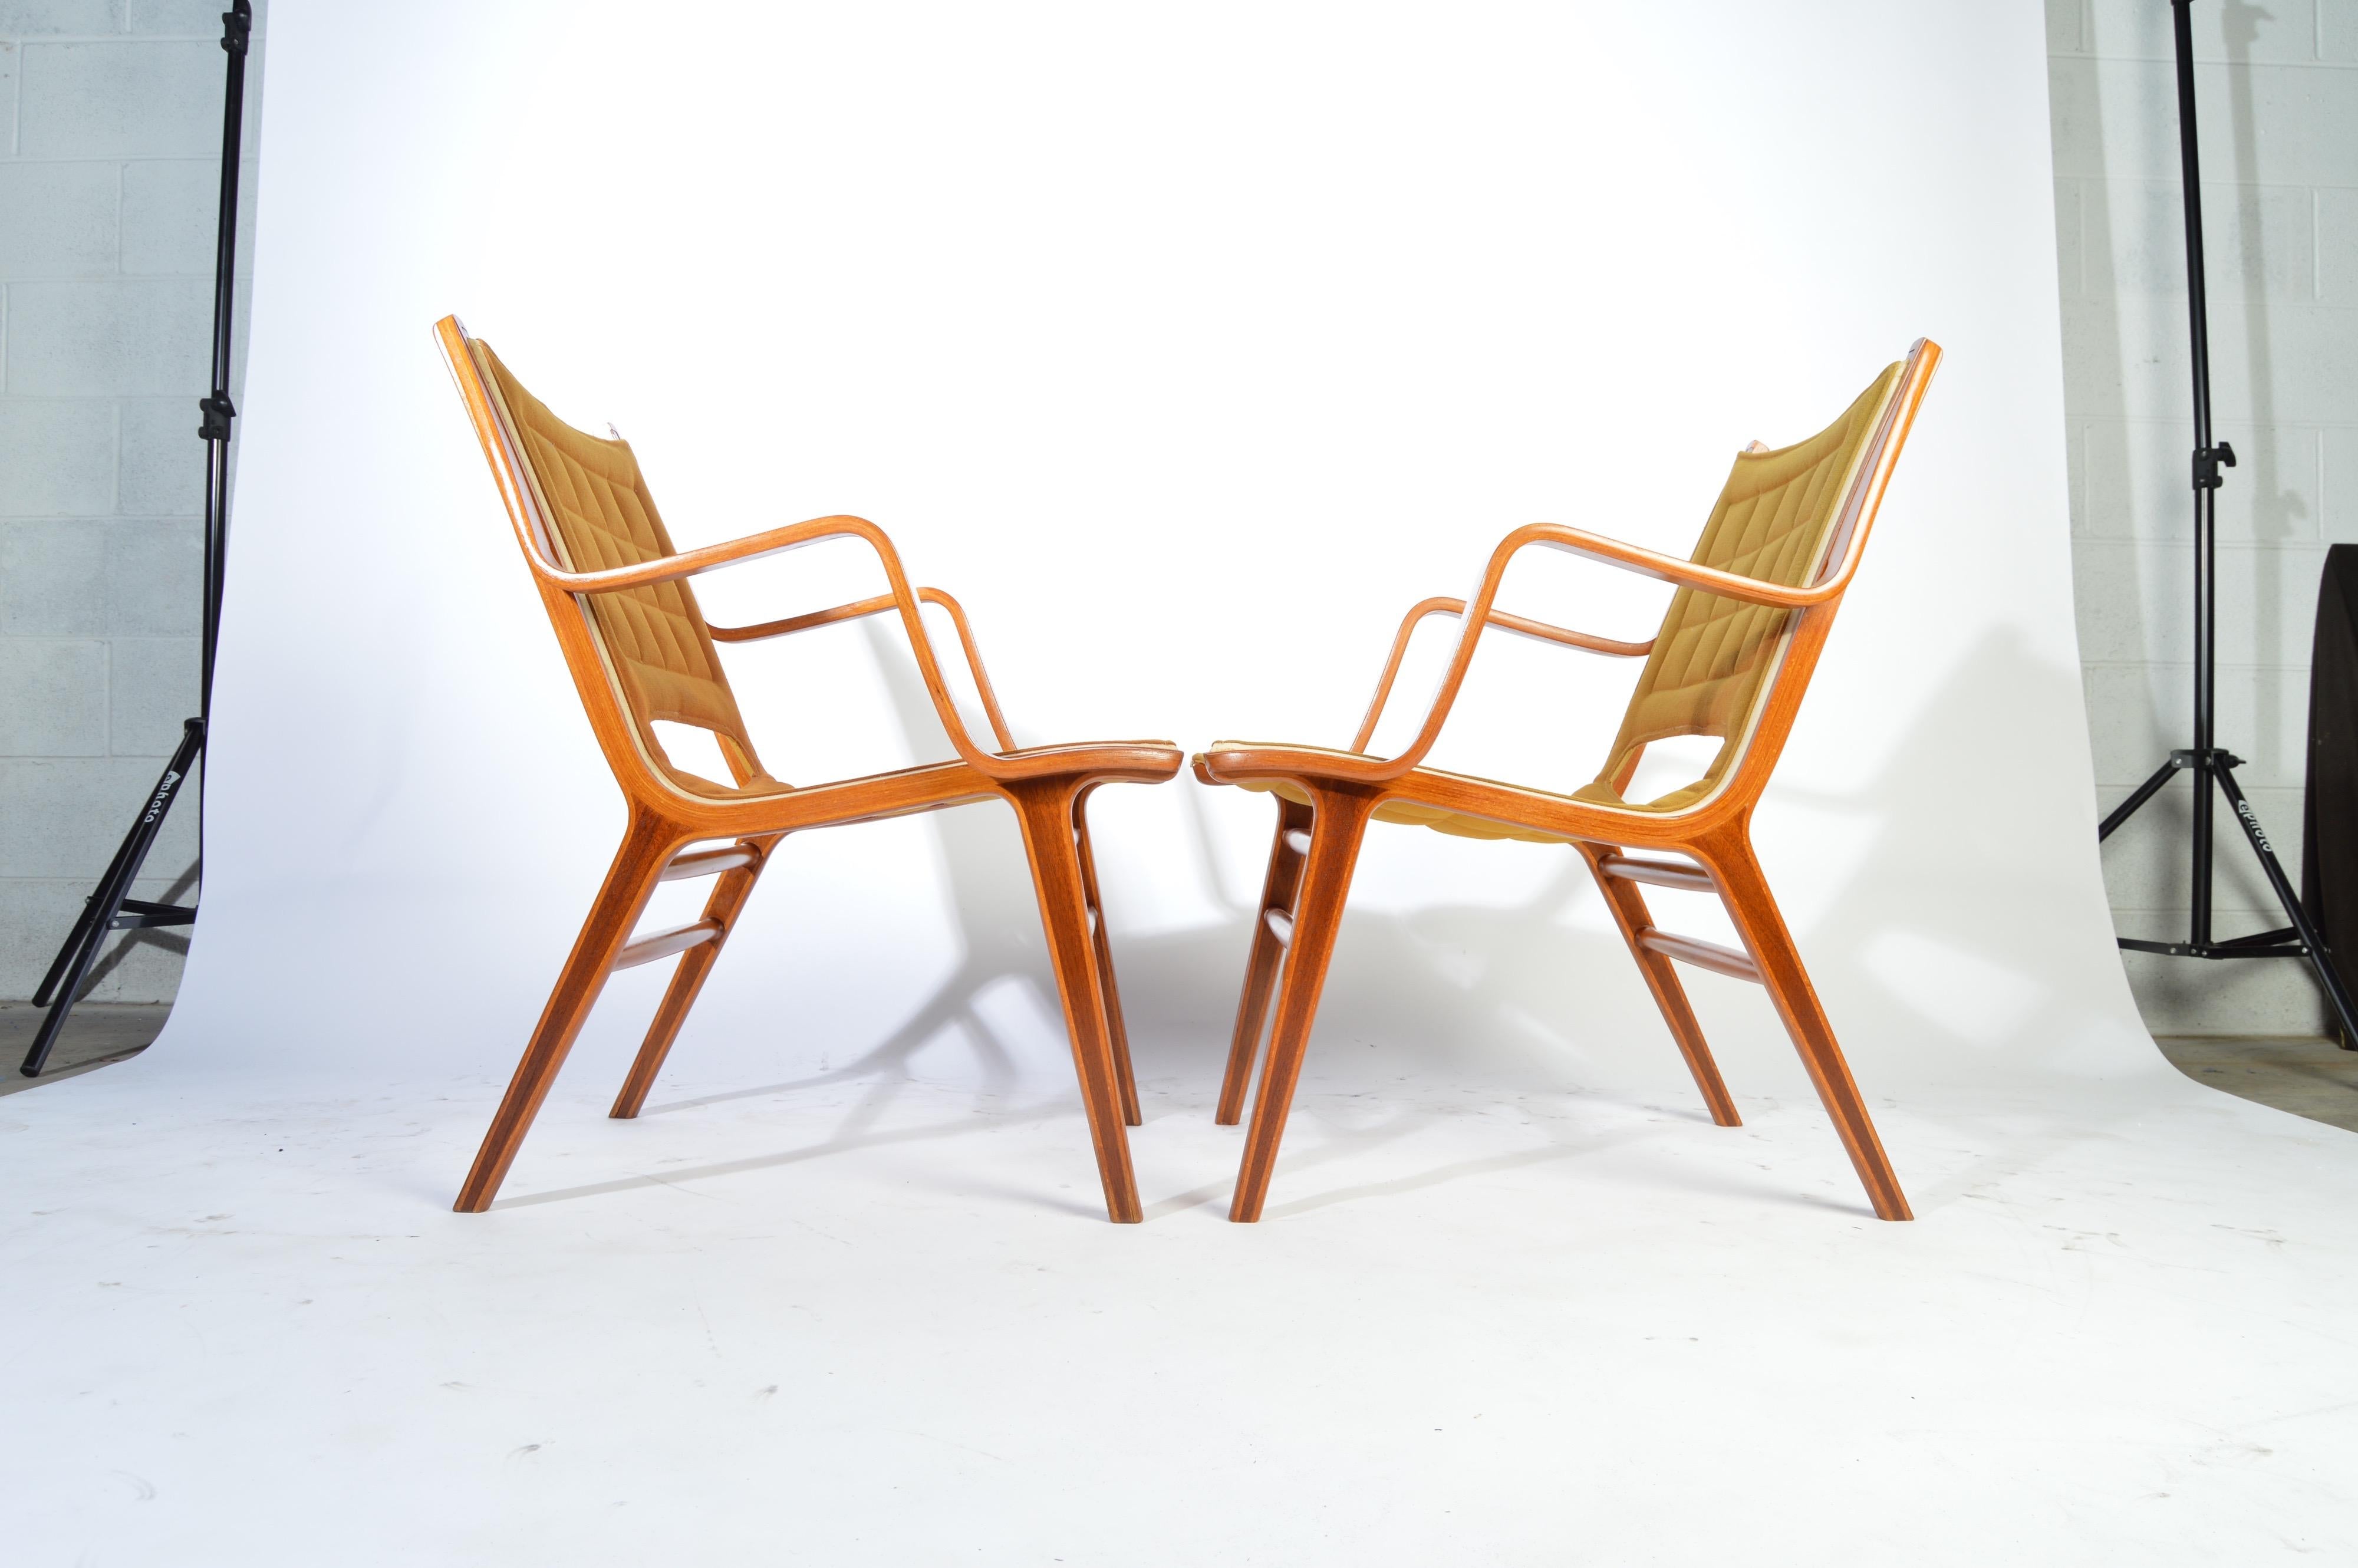 Pair of Ax Bentwood Armchairs by Peter Hvidt & Orla Møllgaard Nielsen for Fritz Hansen, circa 1950
Outstanding overall condition with minor signs of use to original upholstery. Cushion nubs are buoyant and comfortable. Masterfully refinished and